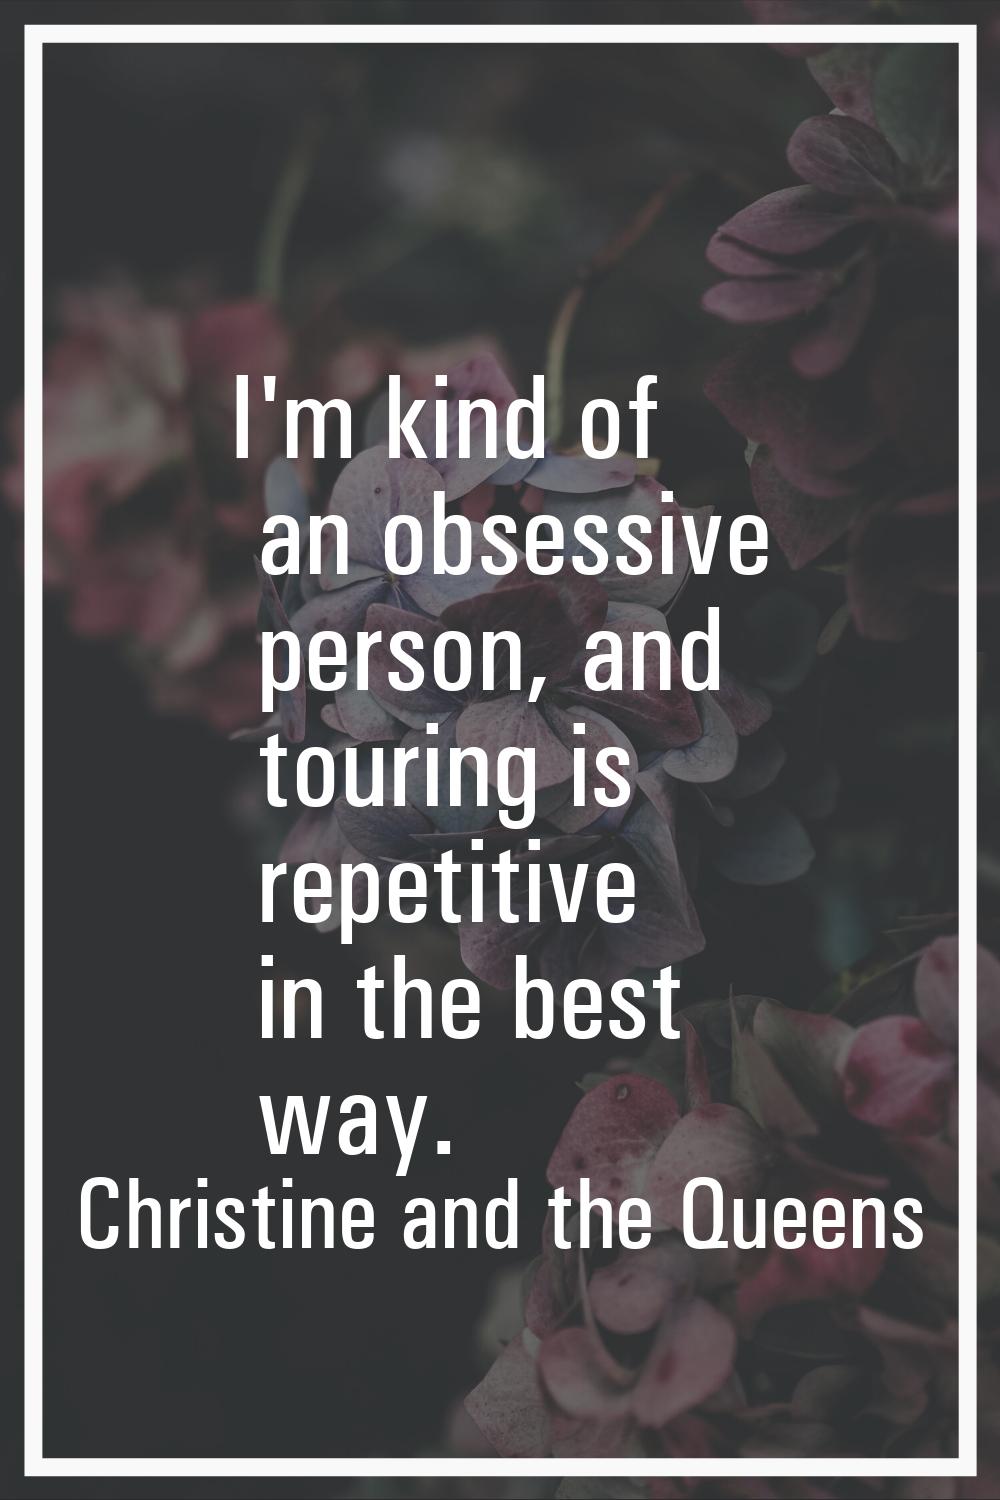 I'm kind of an obsessive person, and touring is repetitive in the best way.